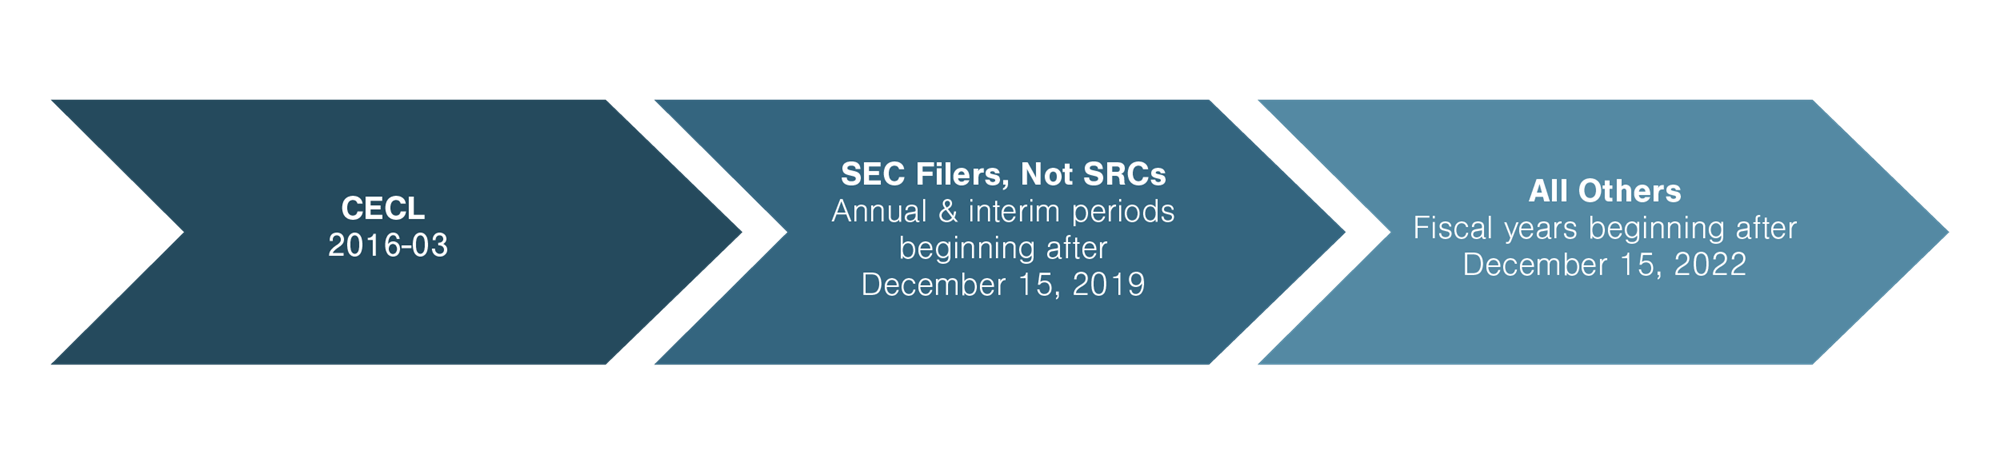 CECL 2016-03 > SEC Filers, Not SRCs - Annual & interim periods beginning after December 15, 2019 > All Others - Fiscal years beginning after December 15, 2022